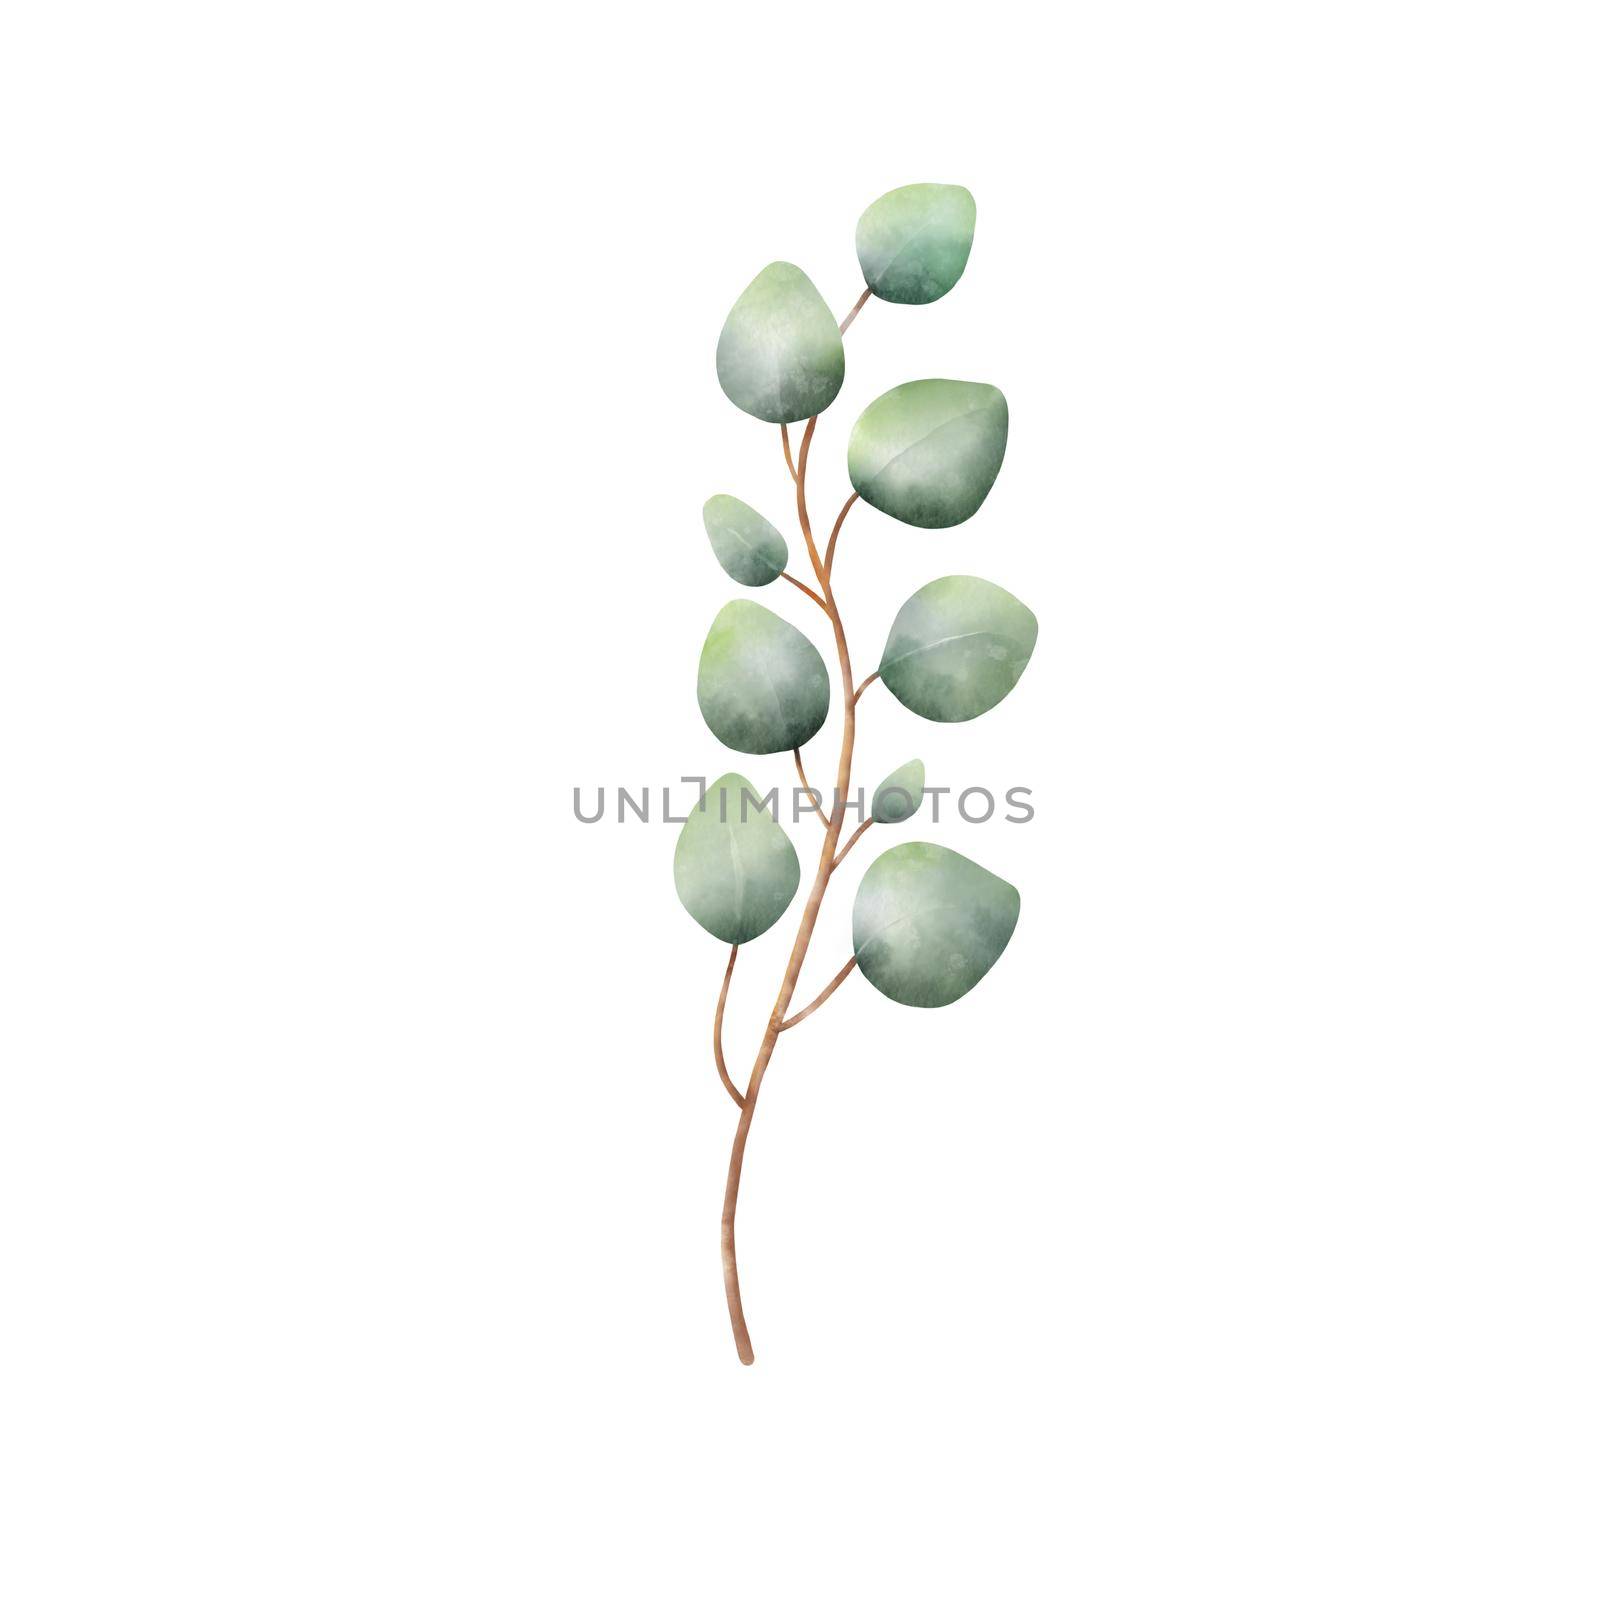 Watercolor Eucaliptus branch drawing. Hand drawn illustration with eucalyptus leaves isolated on white background. Floral herbal image of green plant